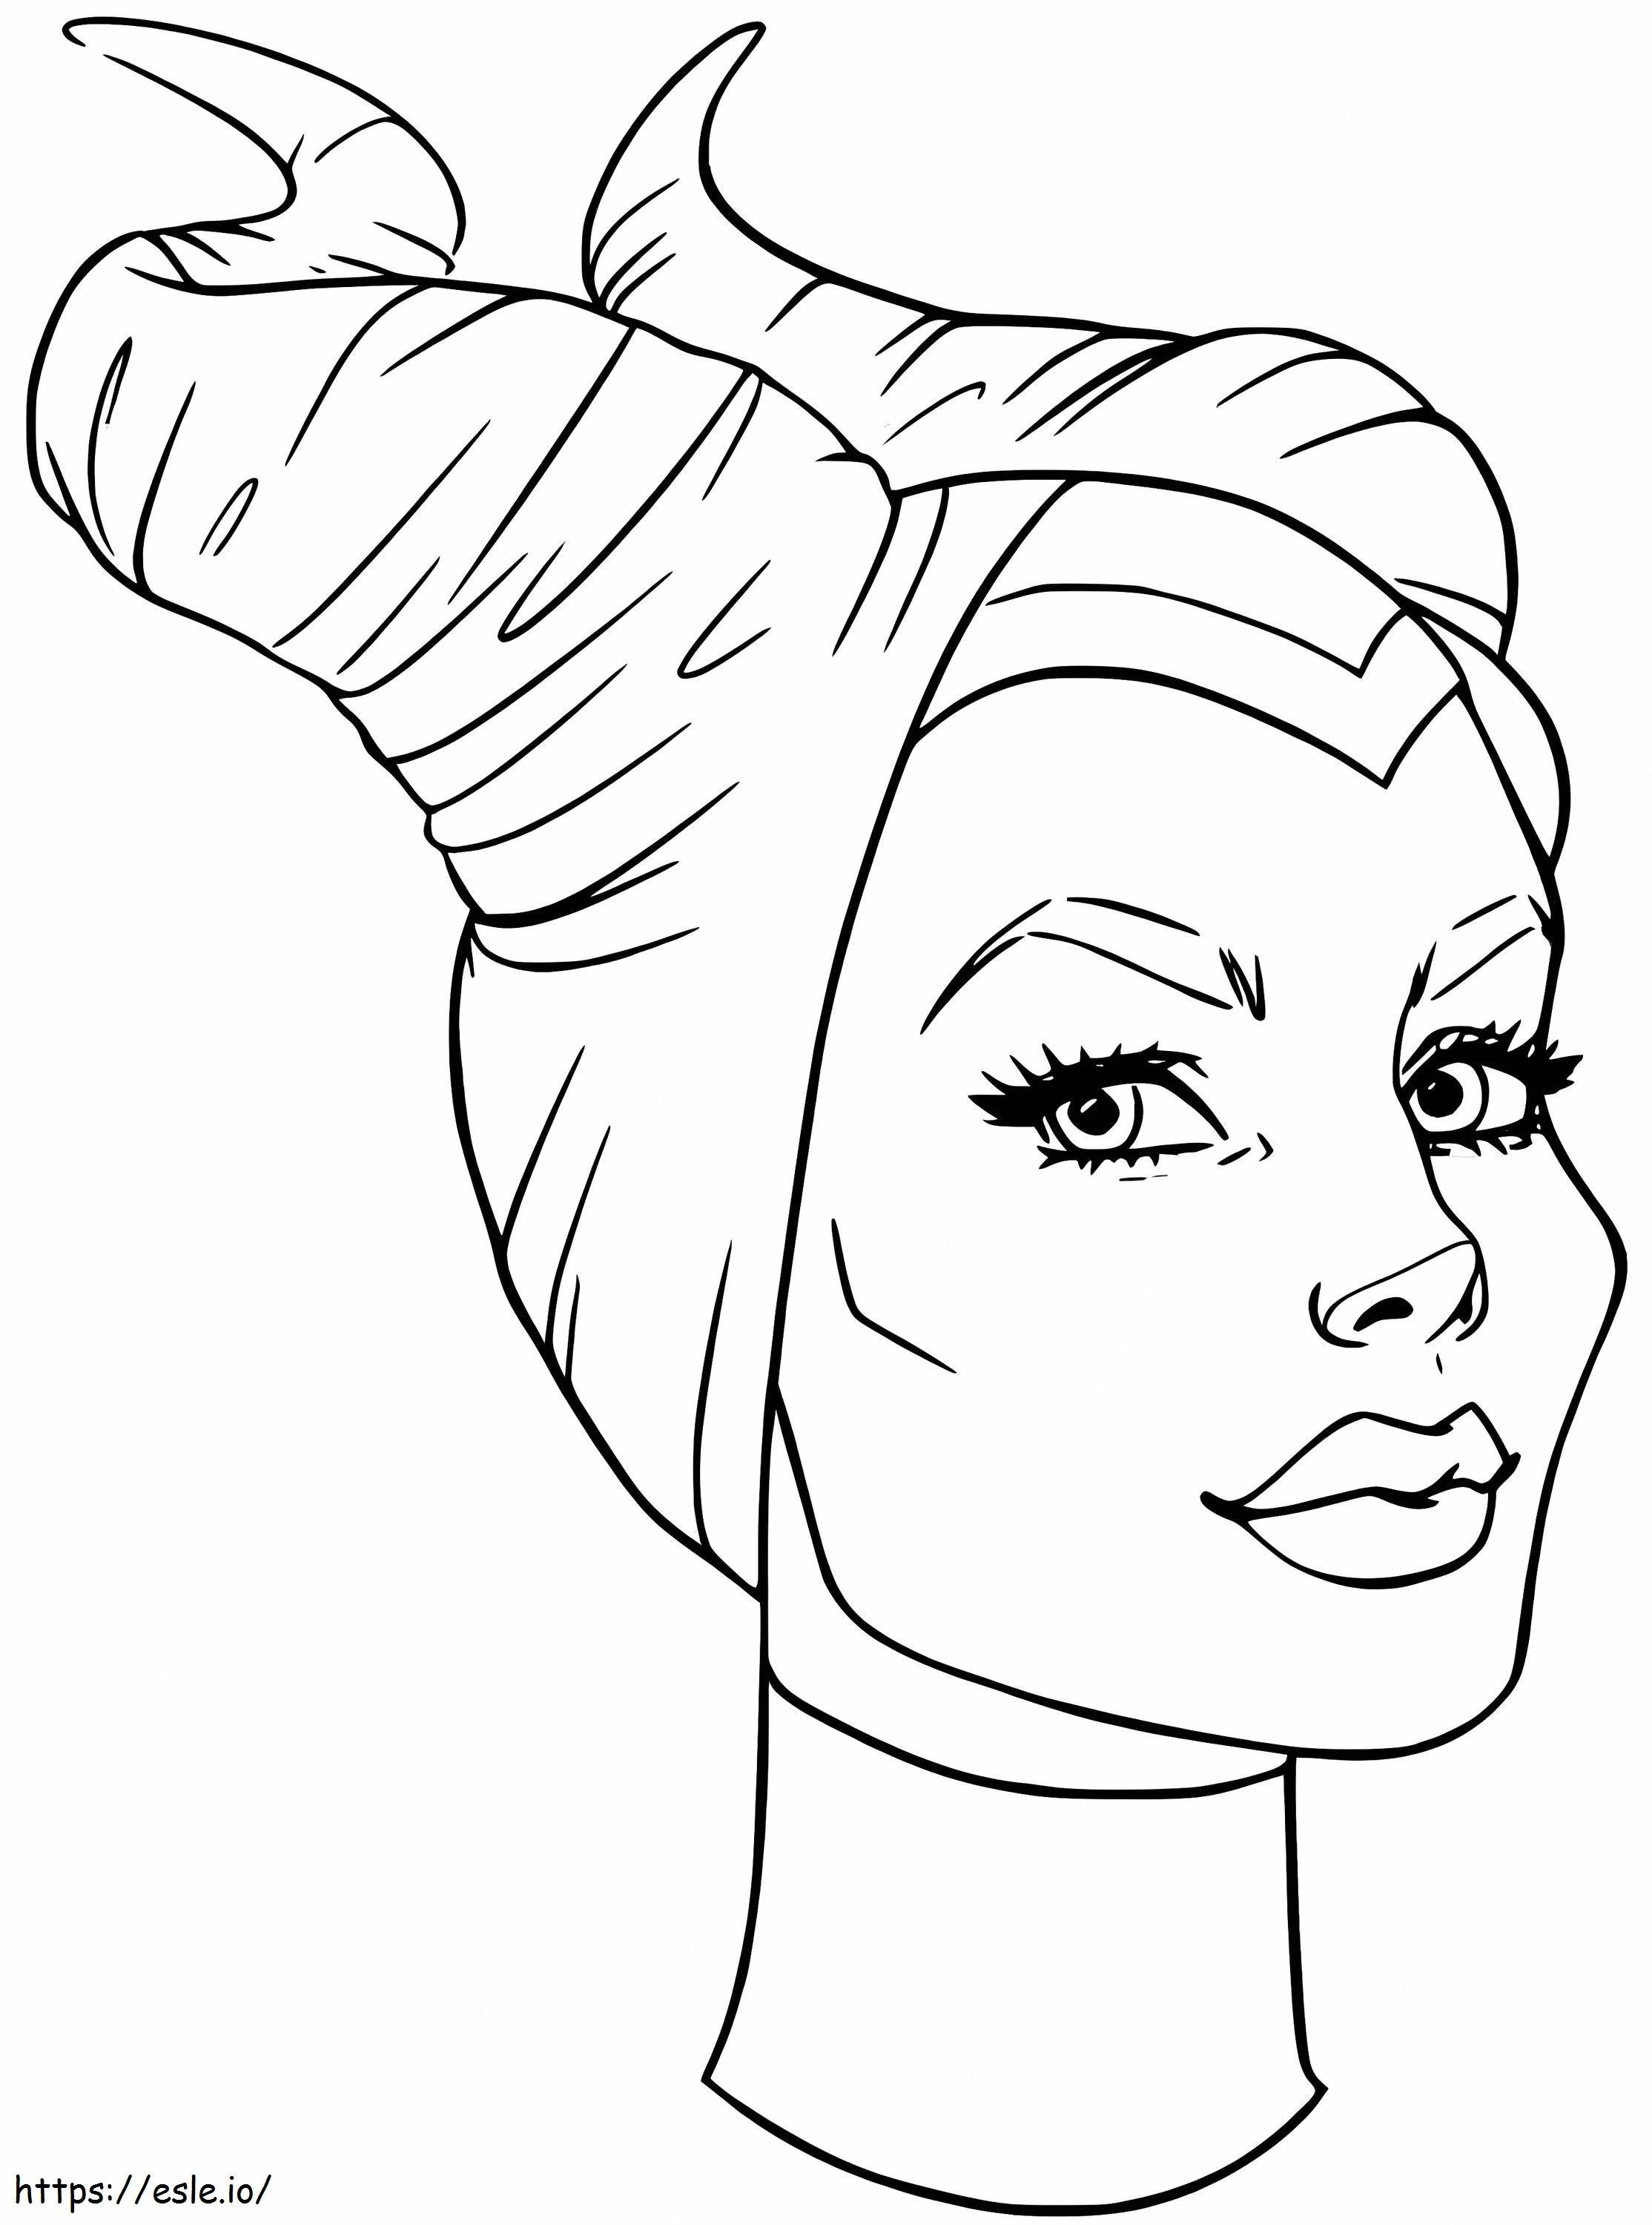 Maleficent Face coloring page